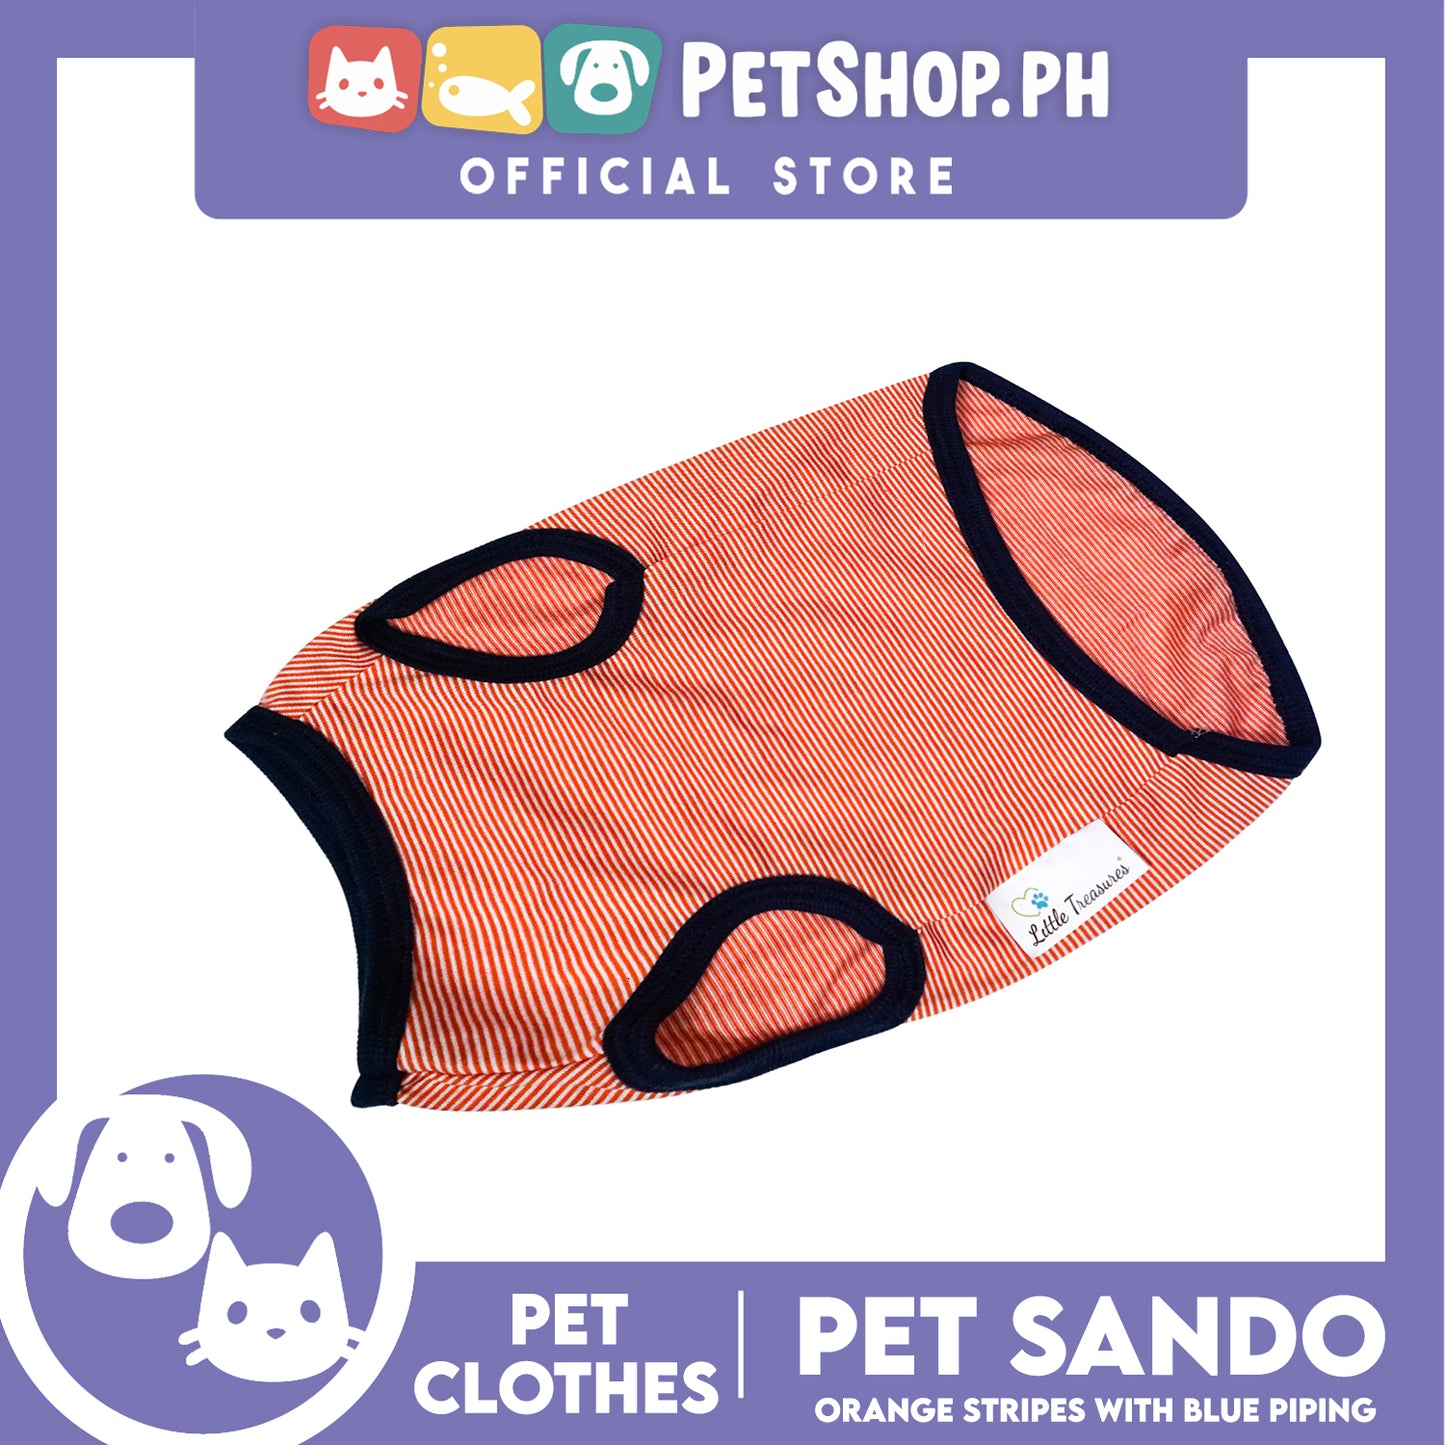 Pet Sando Orange Stripes with Blue Piping (Extra Large) Pet Shirt Clothes Perfect fit for Dogs